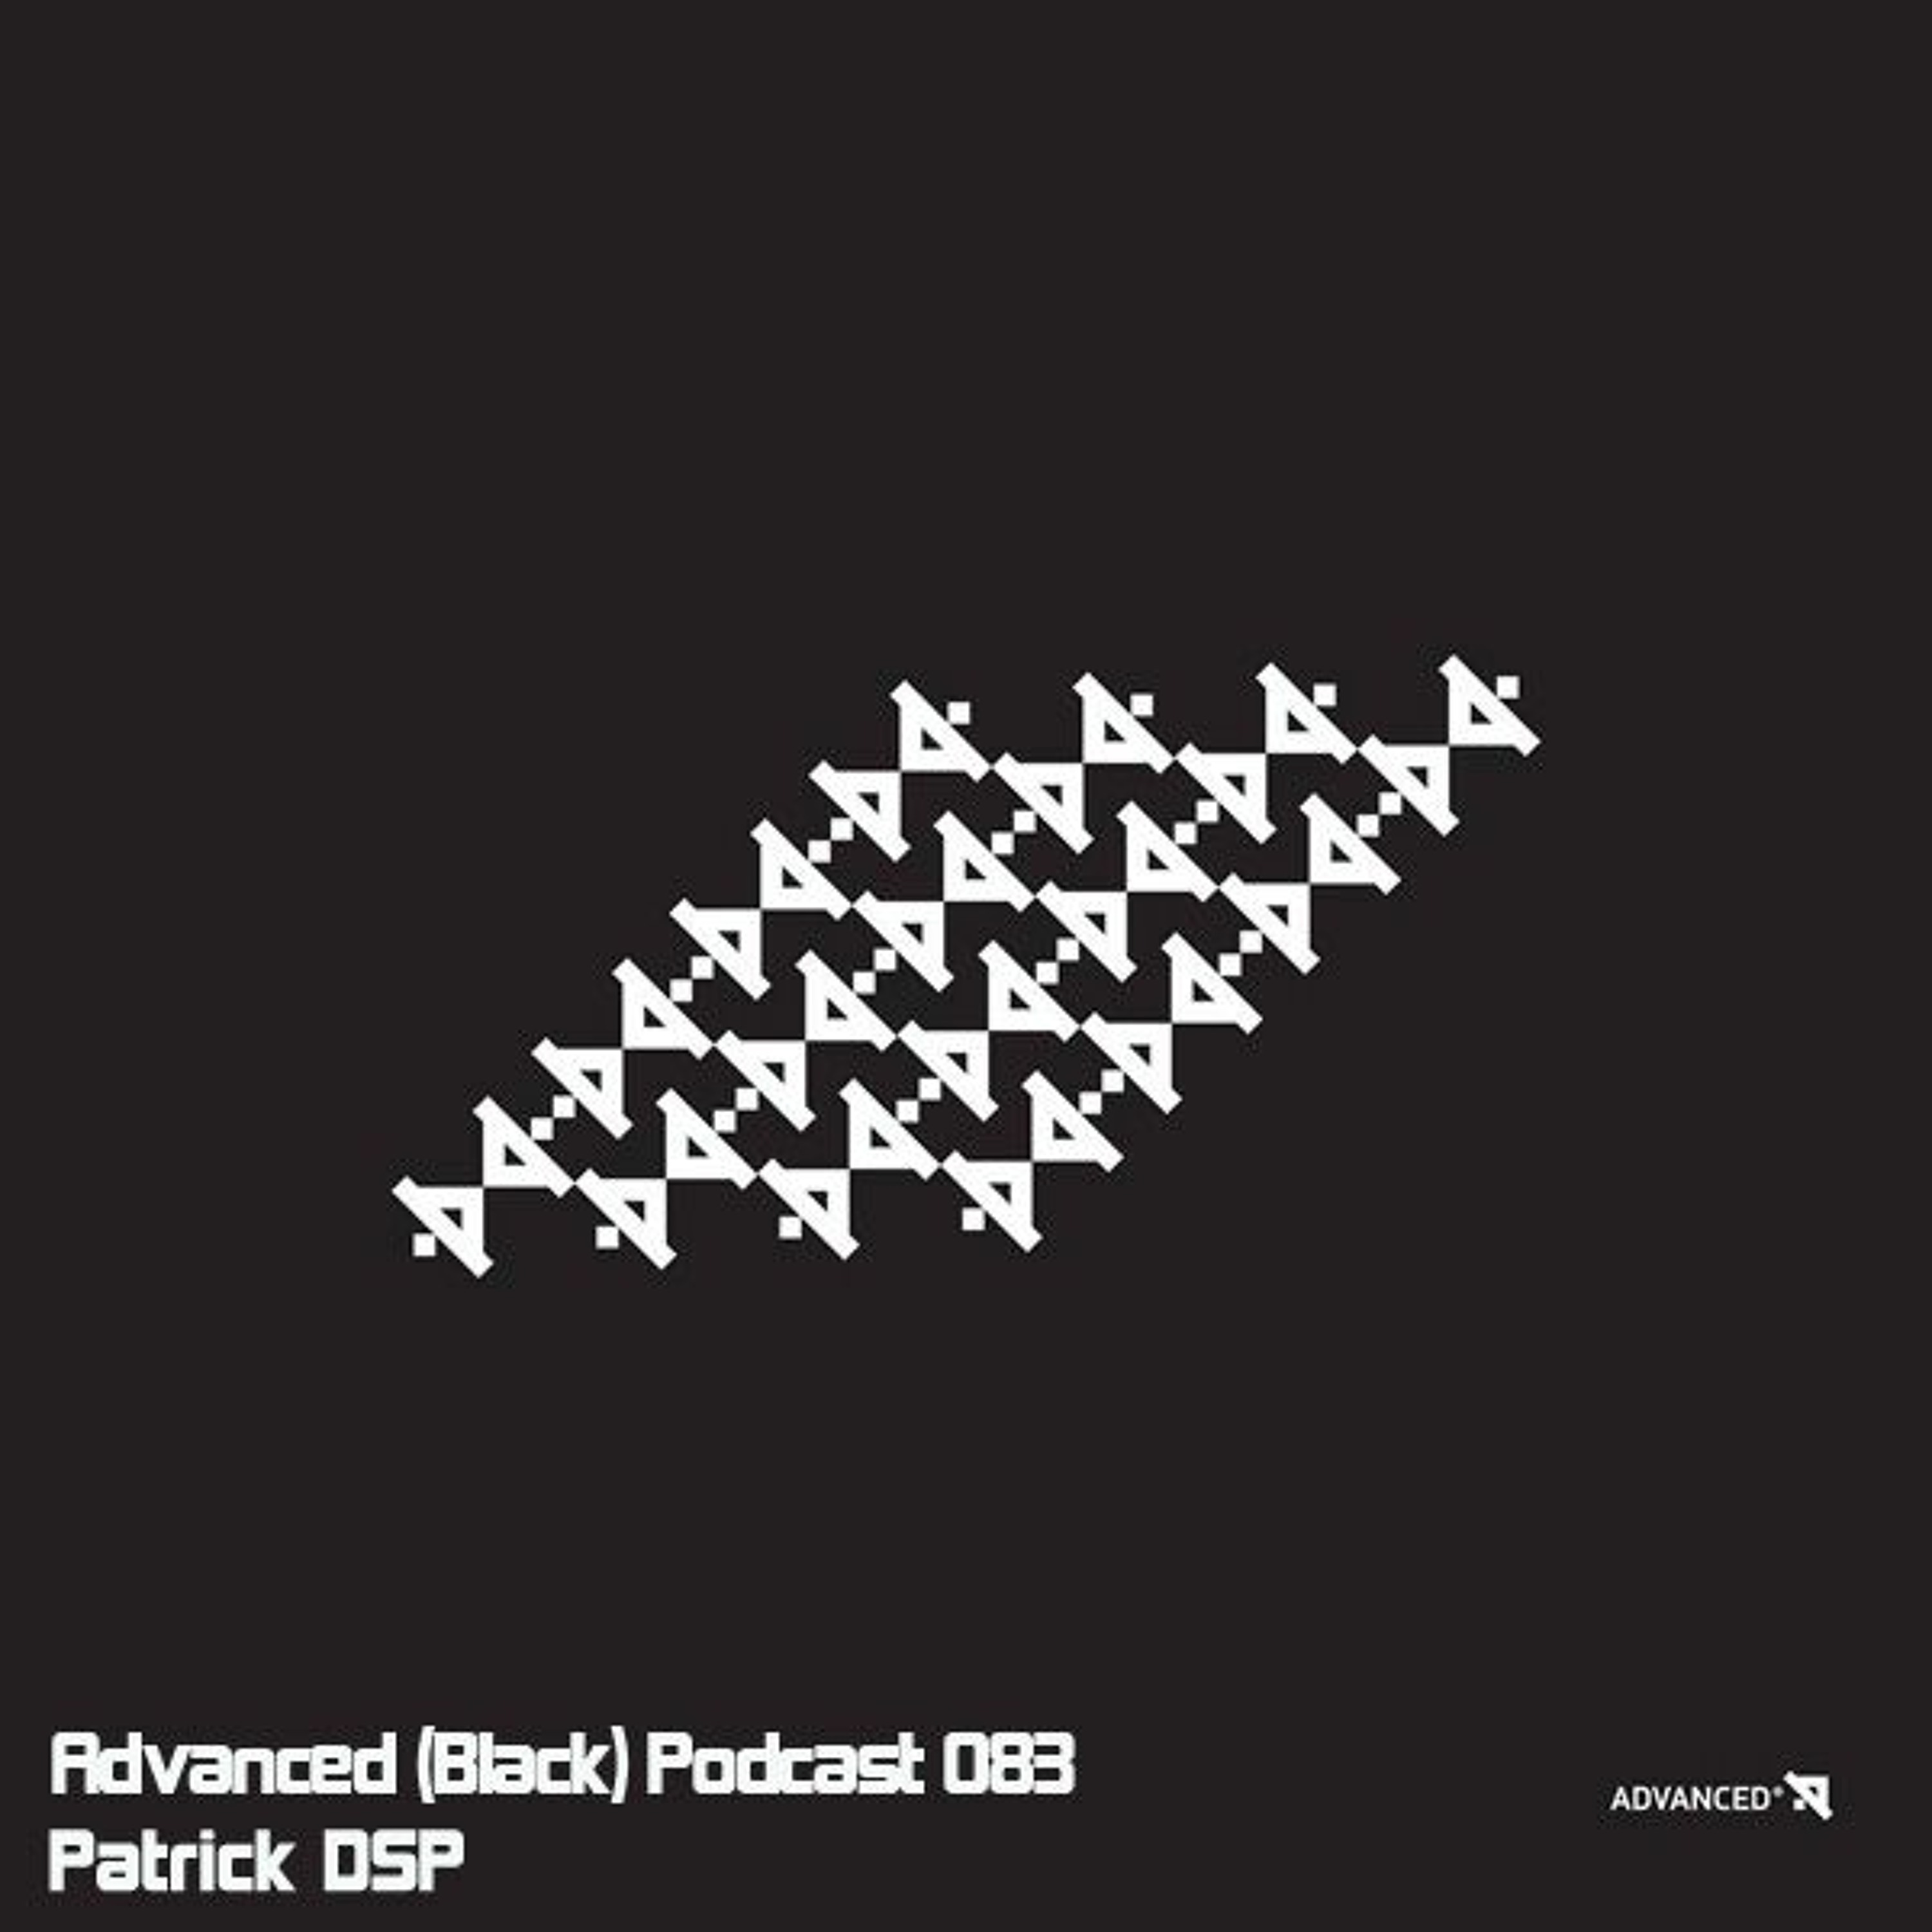 Advanced (Black) Podcast 083 with Patrick DSP (Recorded at Audio City, Wroclaw, Poland)